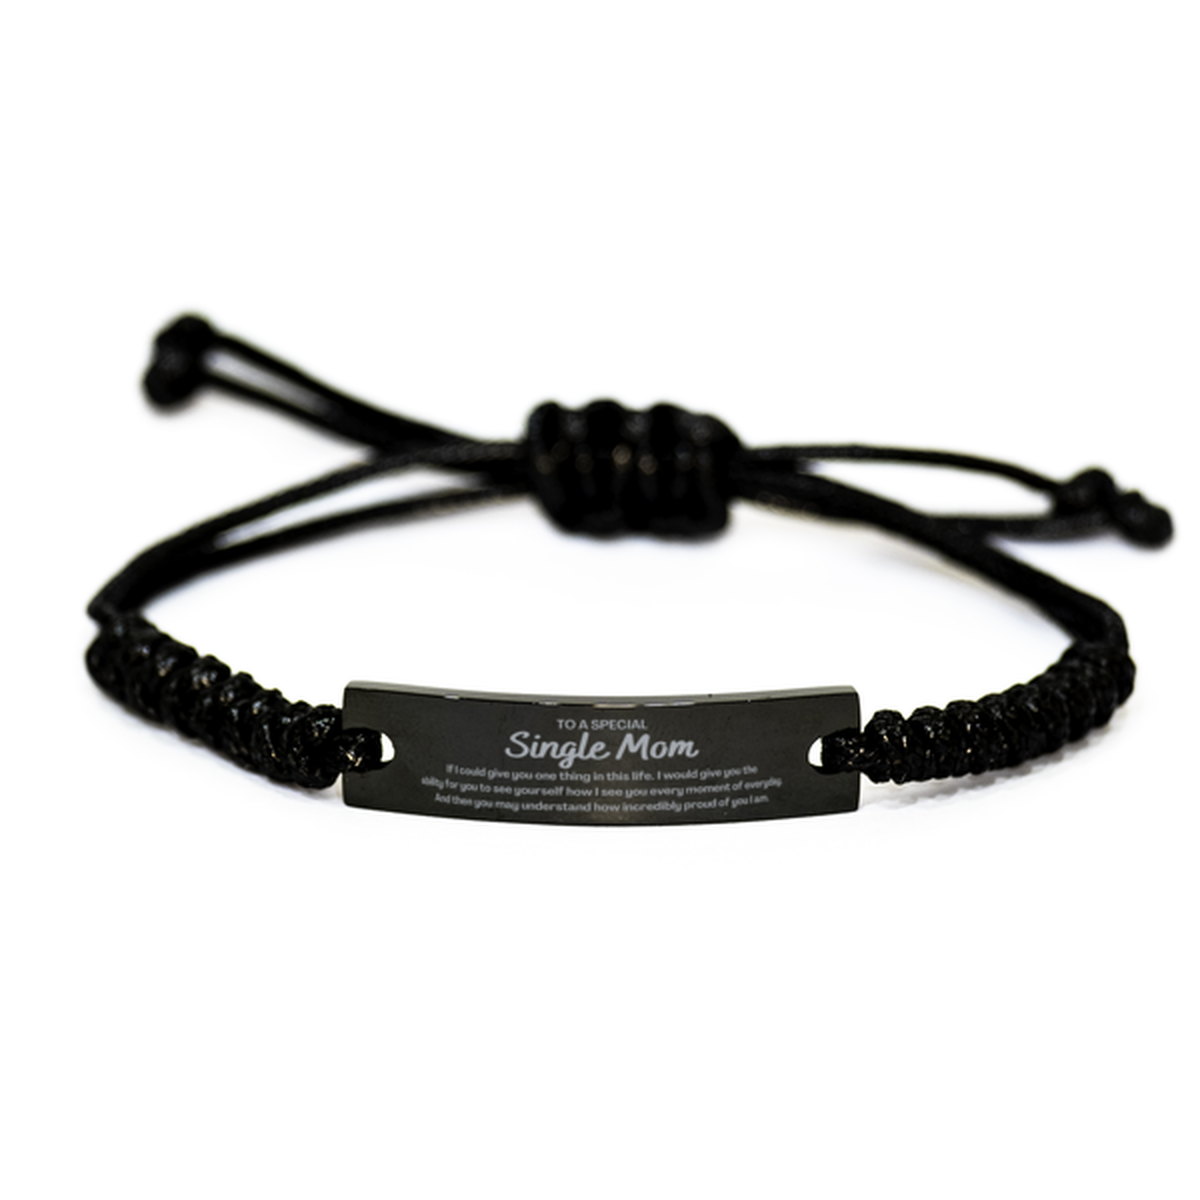 To My Single Mom Black Rope Bracelet, Gifts For Single Mom Engraved, Inspirational Gifts for Christmas Birthday, Epic Gifts for Single Mom To A Special Single Mom how incredibly proud of you I am